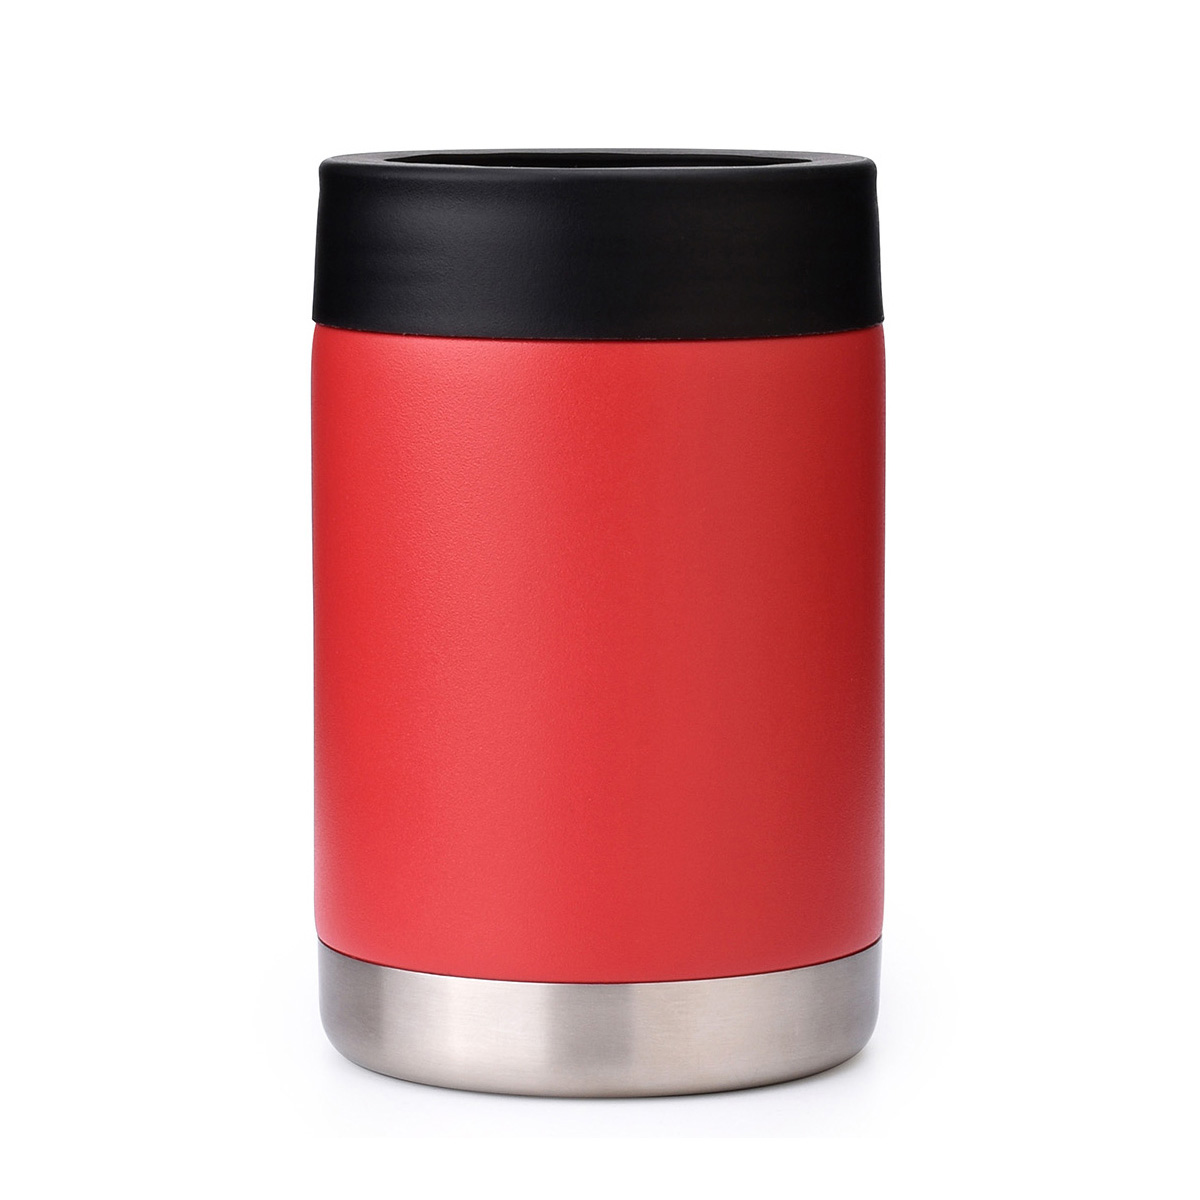 https://www.waterbottle.tech/wp-content/uploads/2019/07/can-cooler-and-bottle-holder-s7112a12.jpg